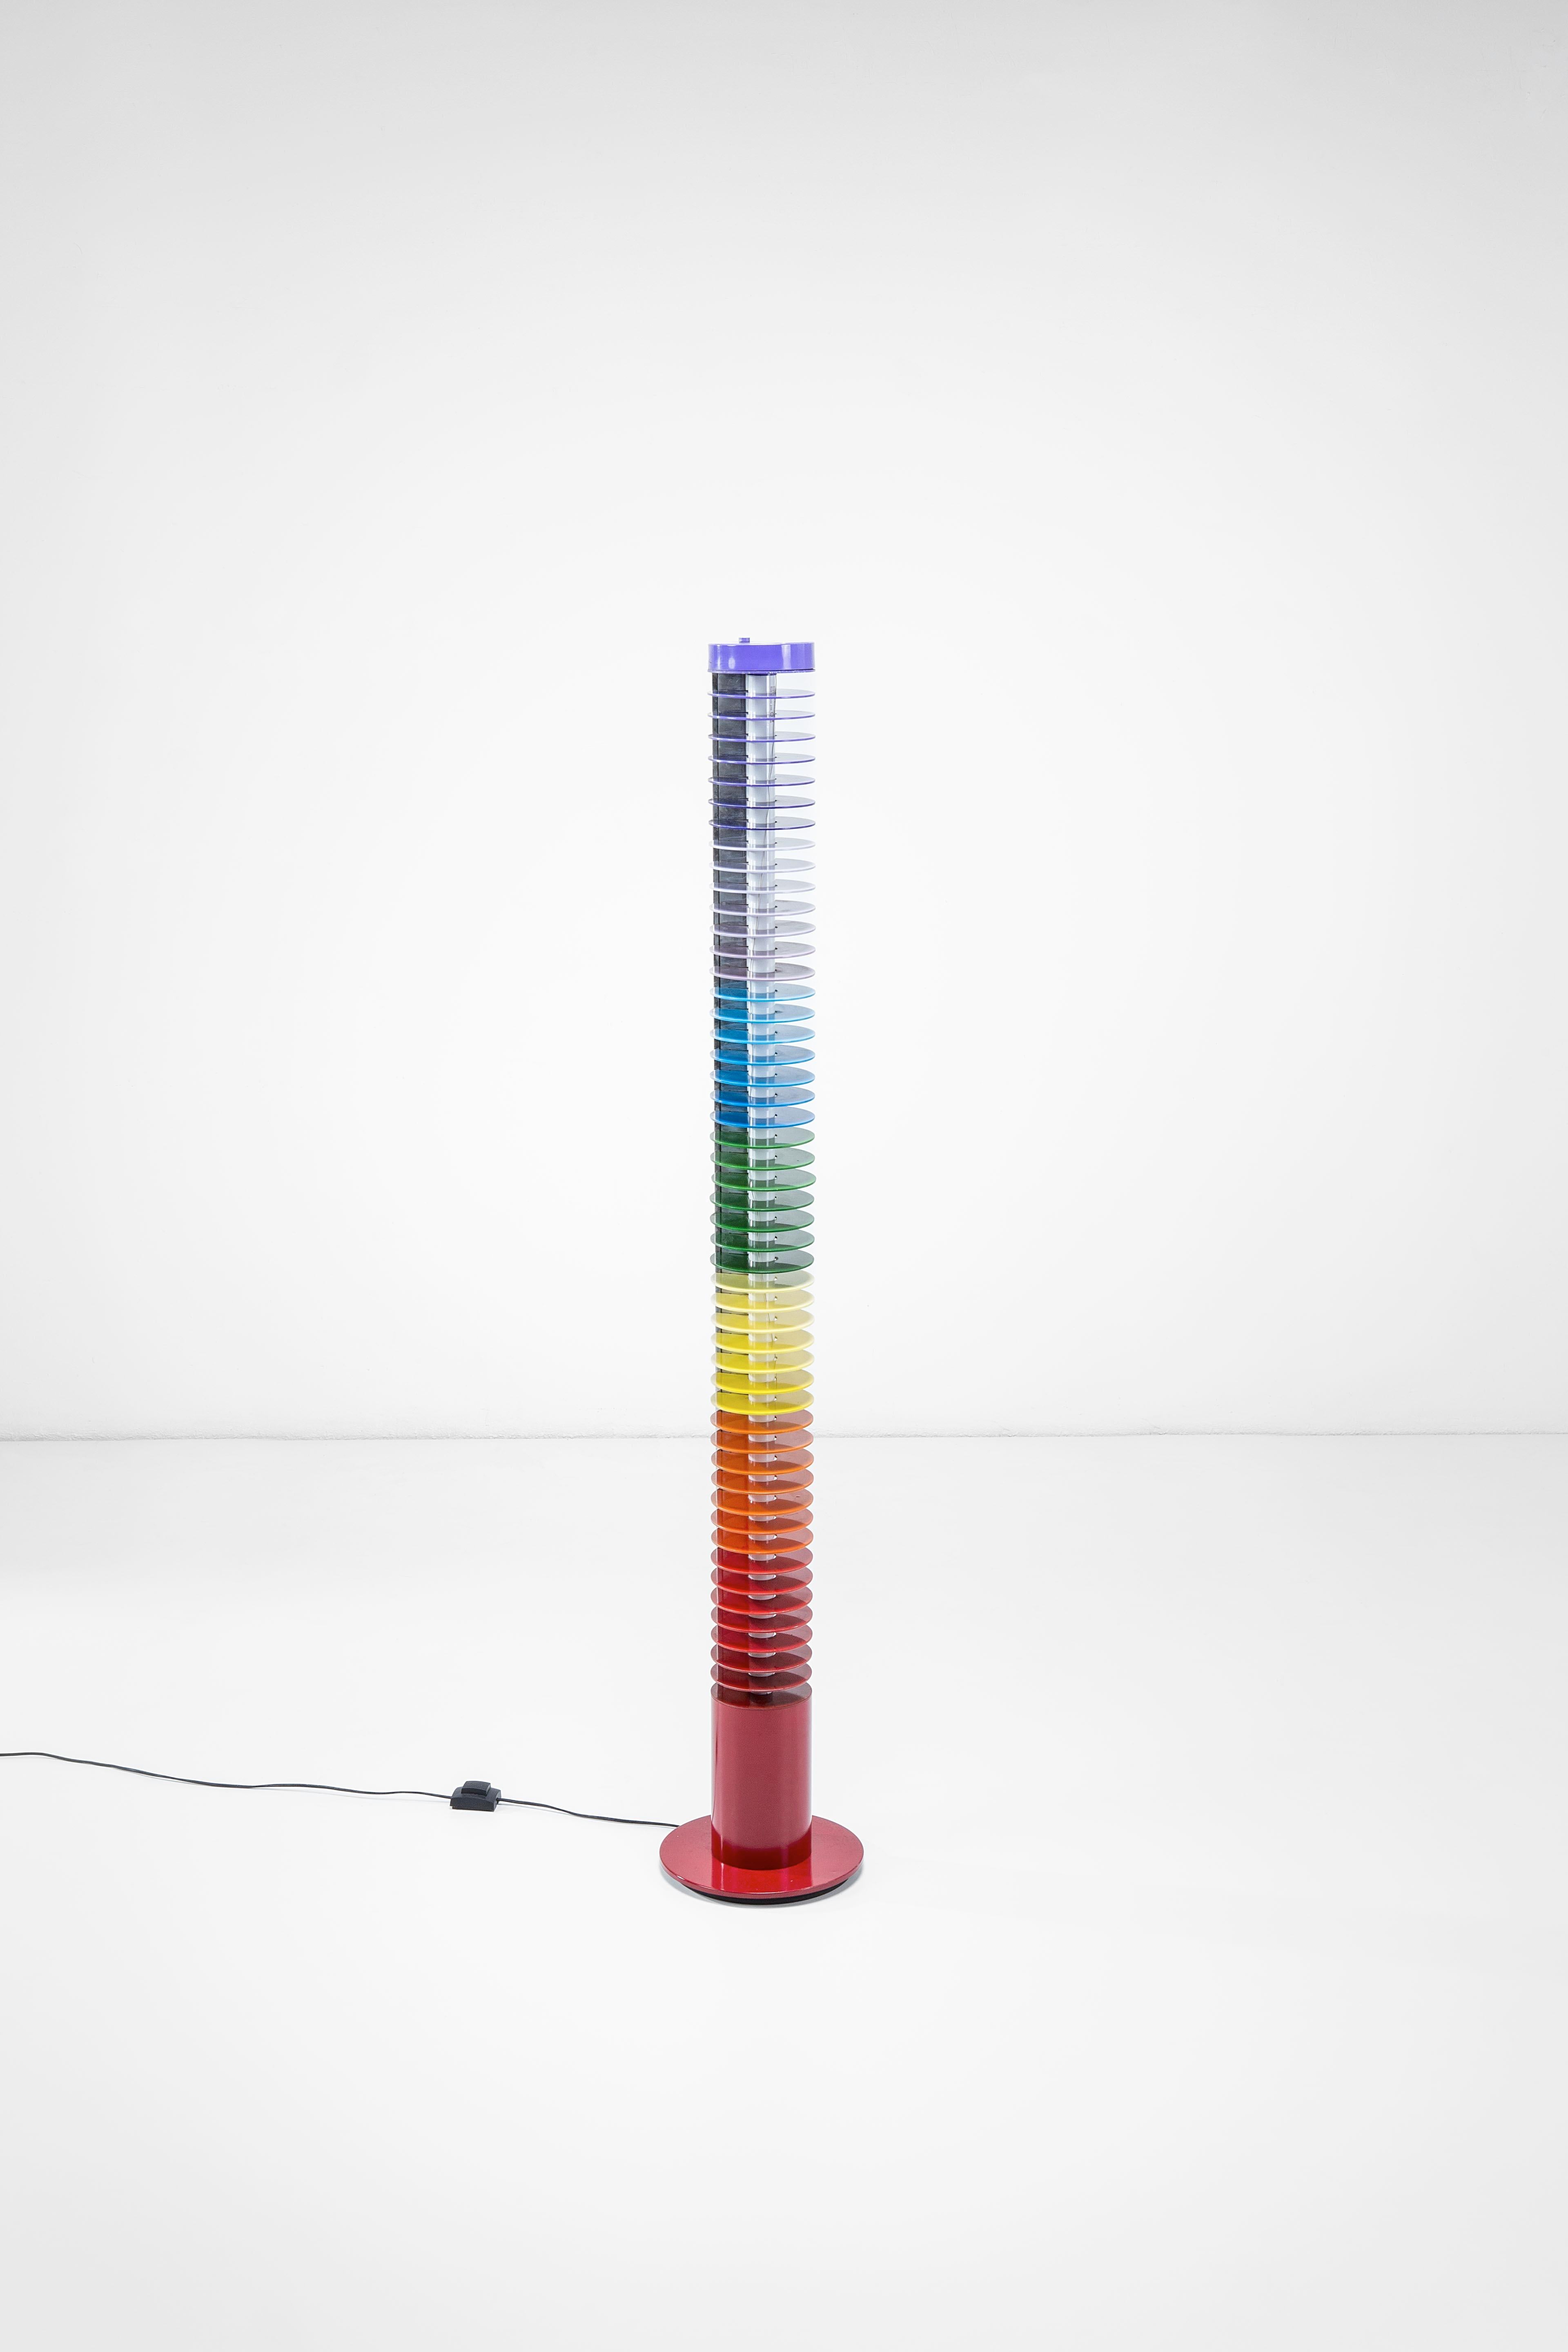 The floor lamp mod. Iride is a joyful invention by Ico Parisi for Lamperti and embodies the desire for revolution and inspiration of the 1970s. With a lightweight aluminum and metal structure, the sparklingly colored lamp, thanks to its colored